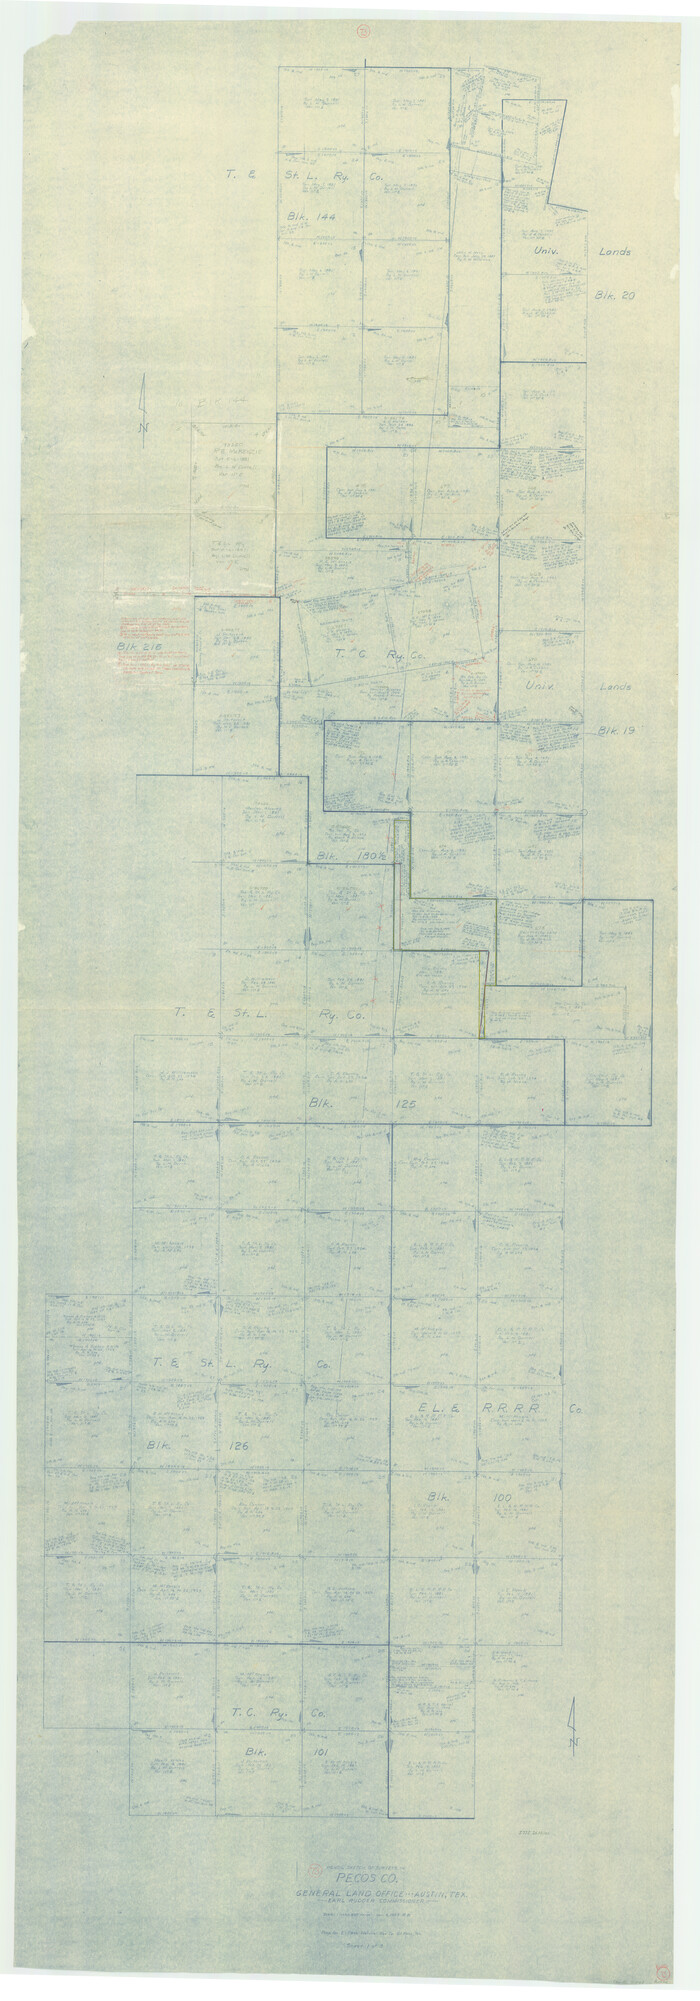 71545, Pecos County Working Sketch 73, General Map Collection